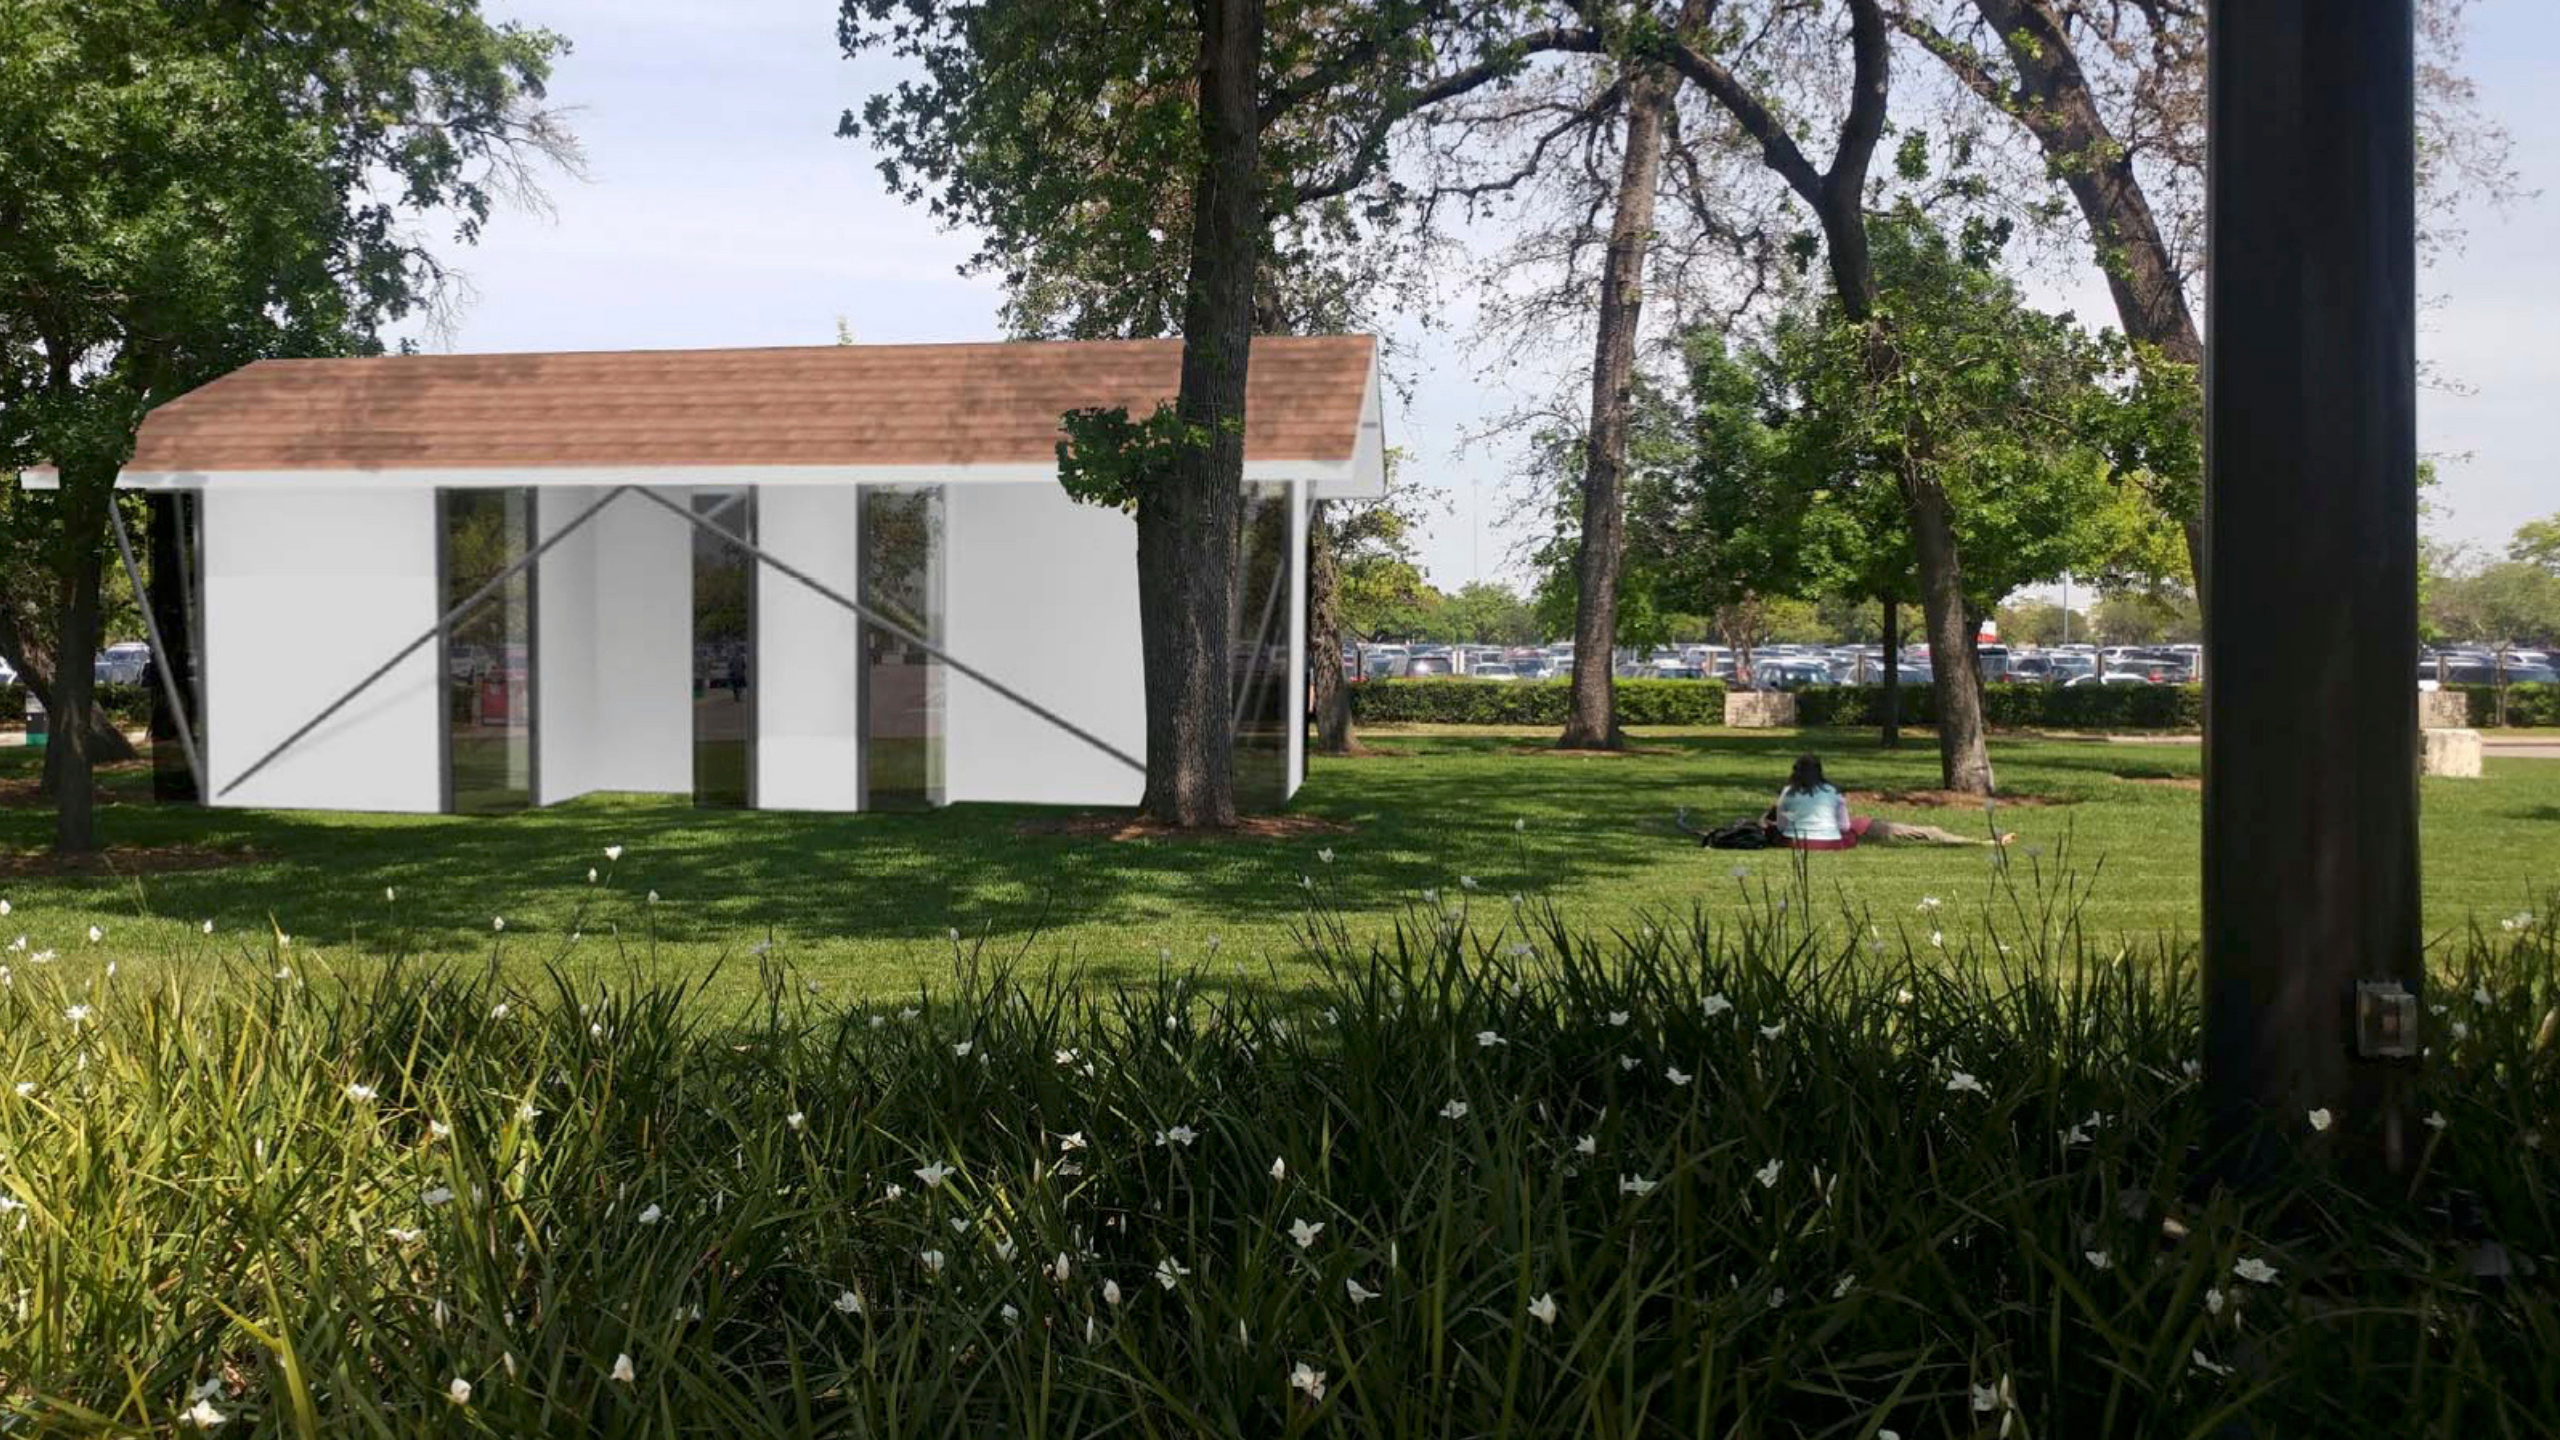 Rendering of Folly in outdoor space